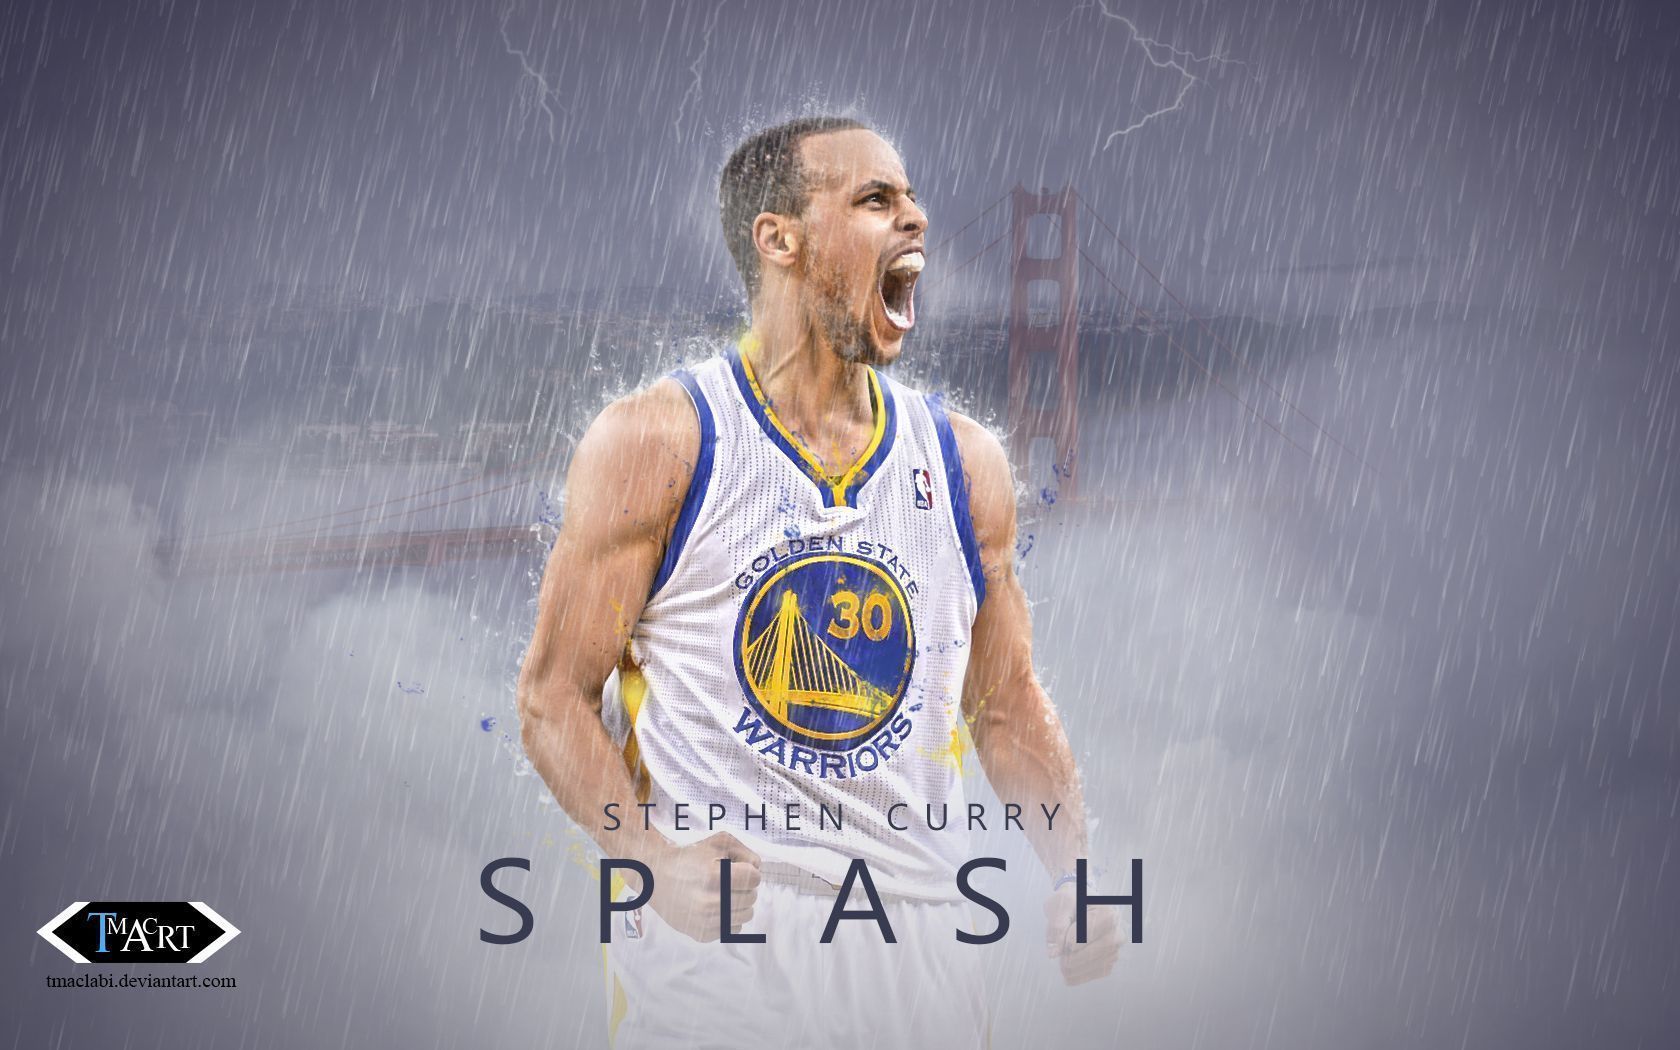 Stephen Curry wallpaper download free